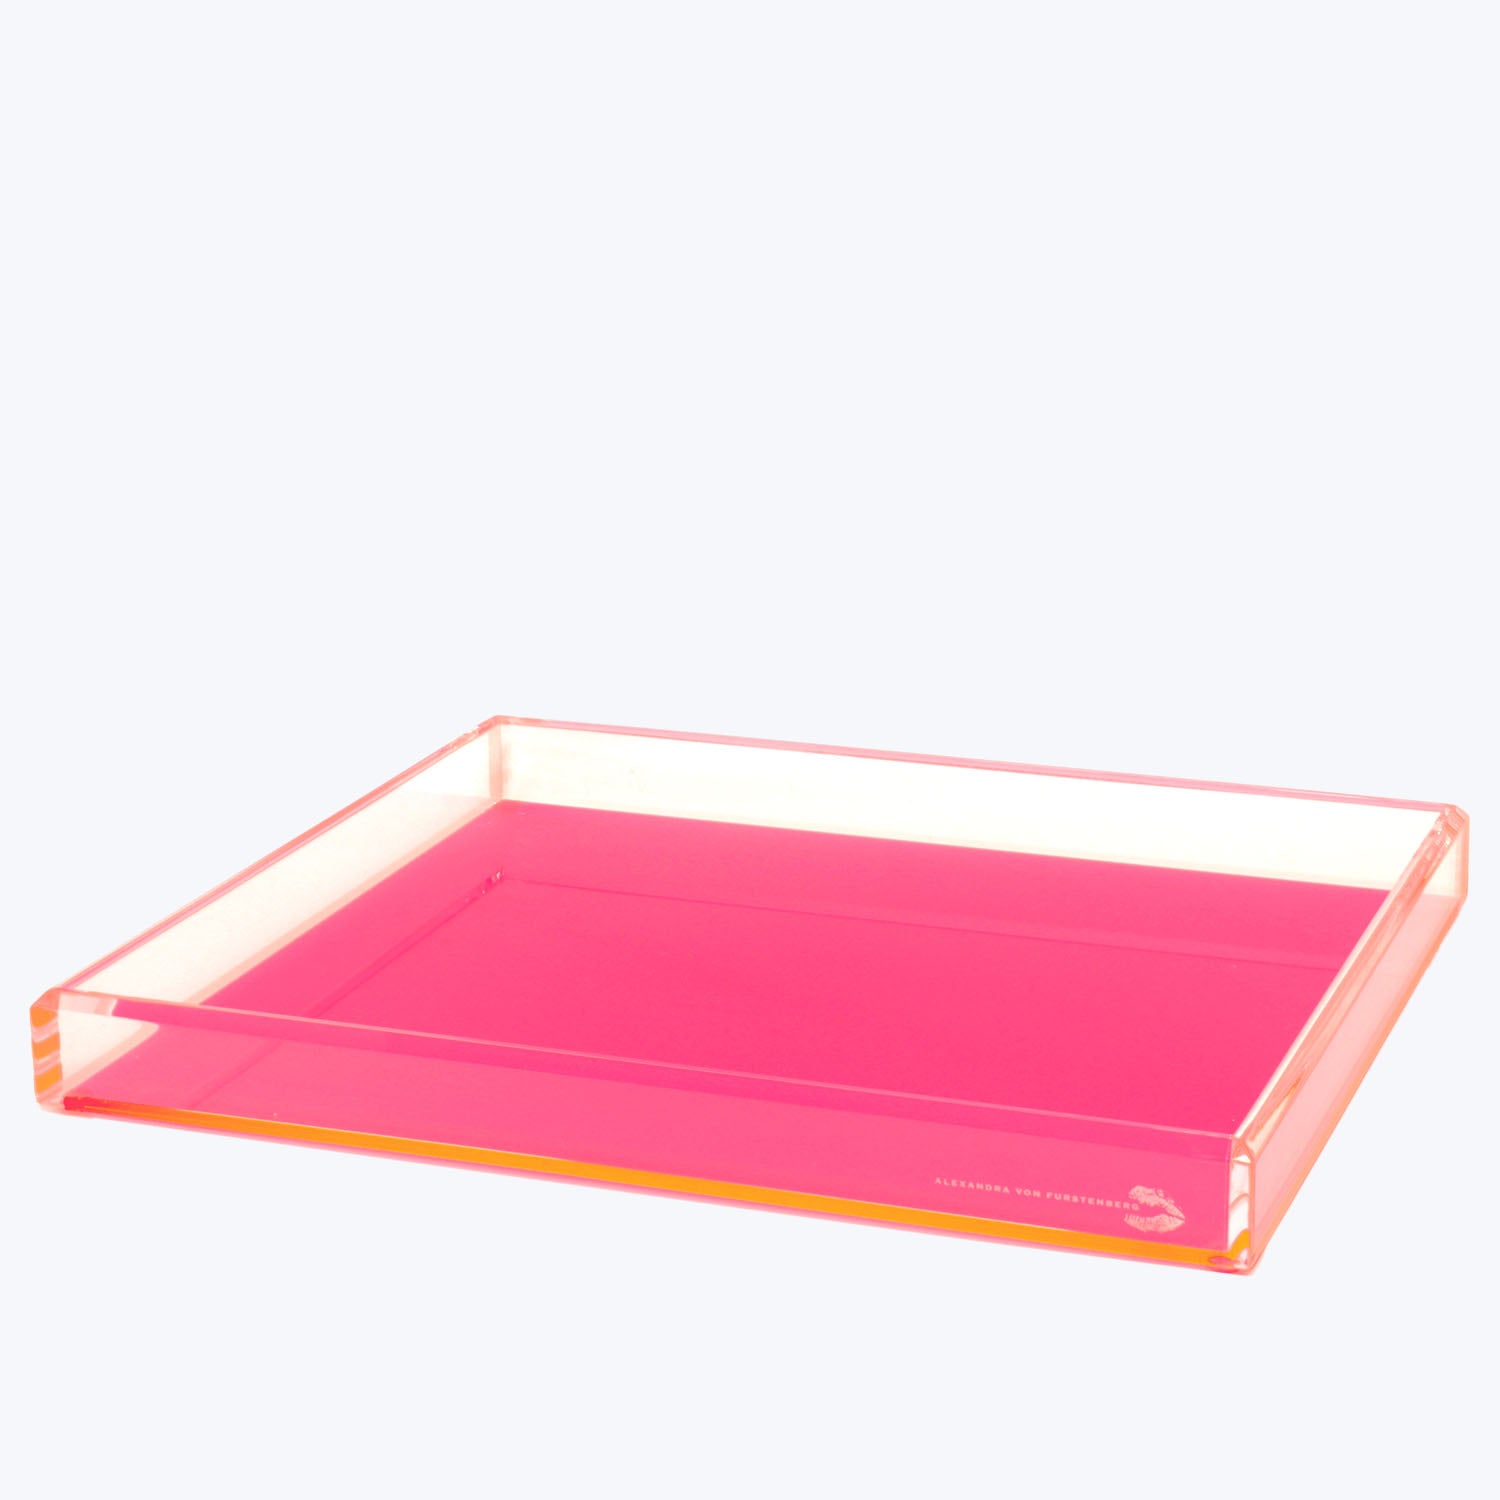 Vibrant rectangular tray with pink base and orange tinted sides.